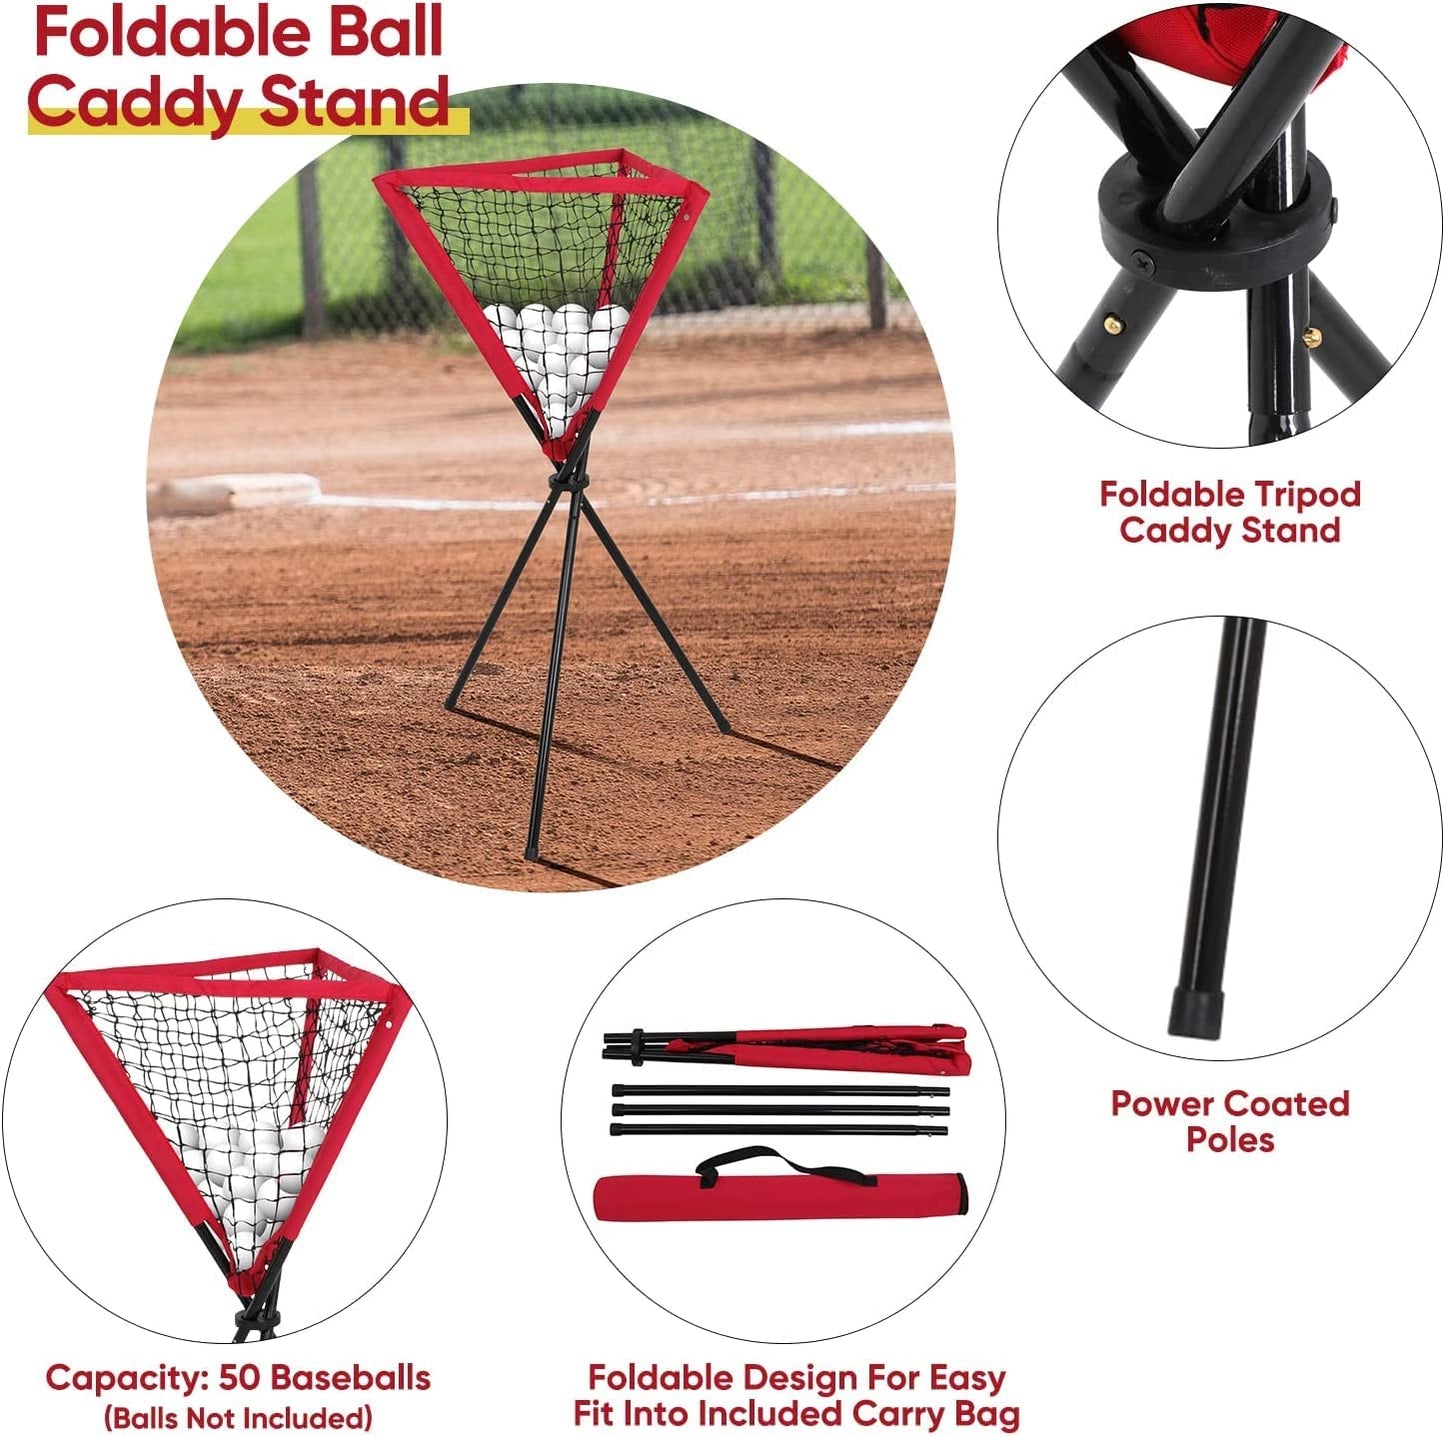 Baseball Softball Net Combo 7x7 Hitting Net Baseball Backstop Practice Net for Pitching Catching, with Batting Tee, Ball Caddy, Strike Zone and Carry Bag